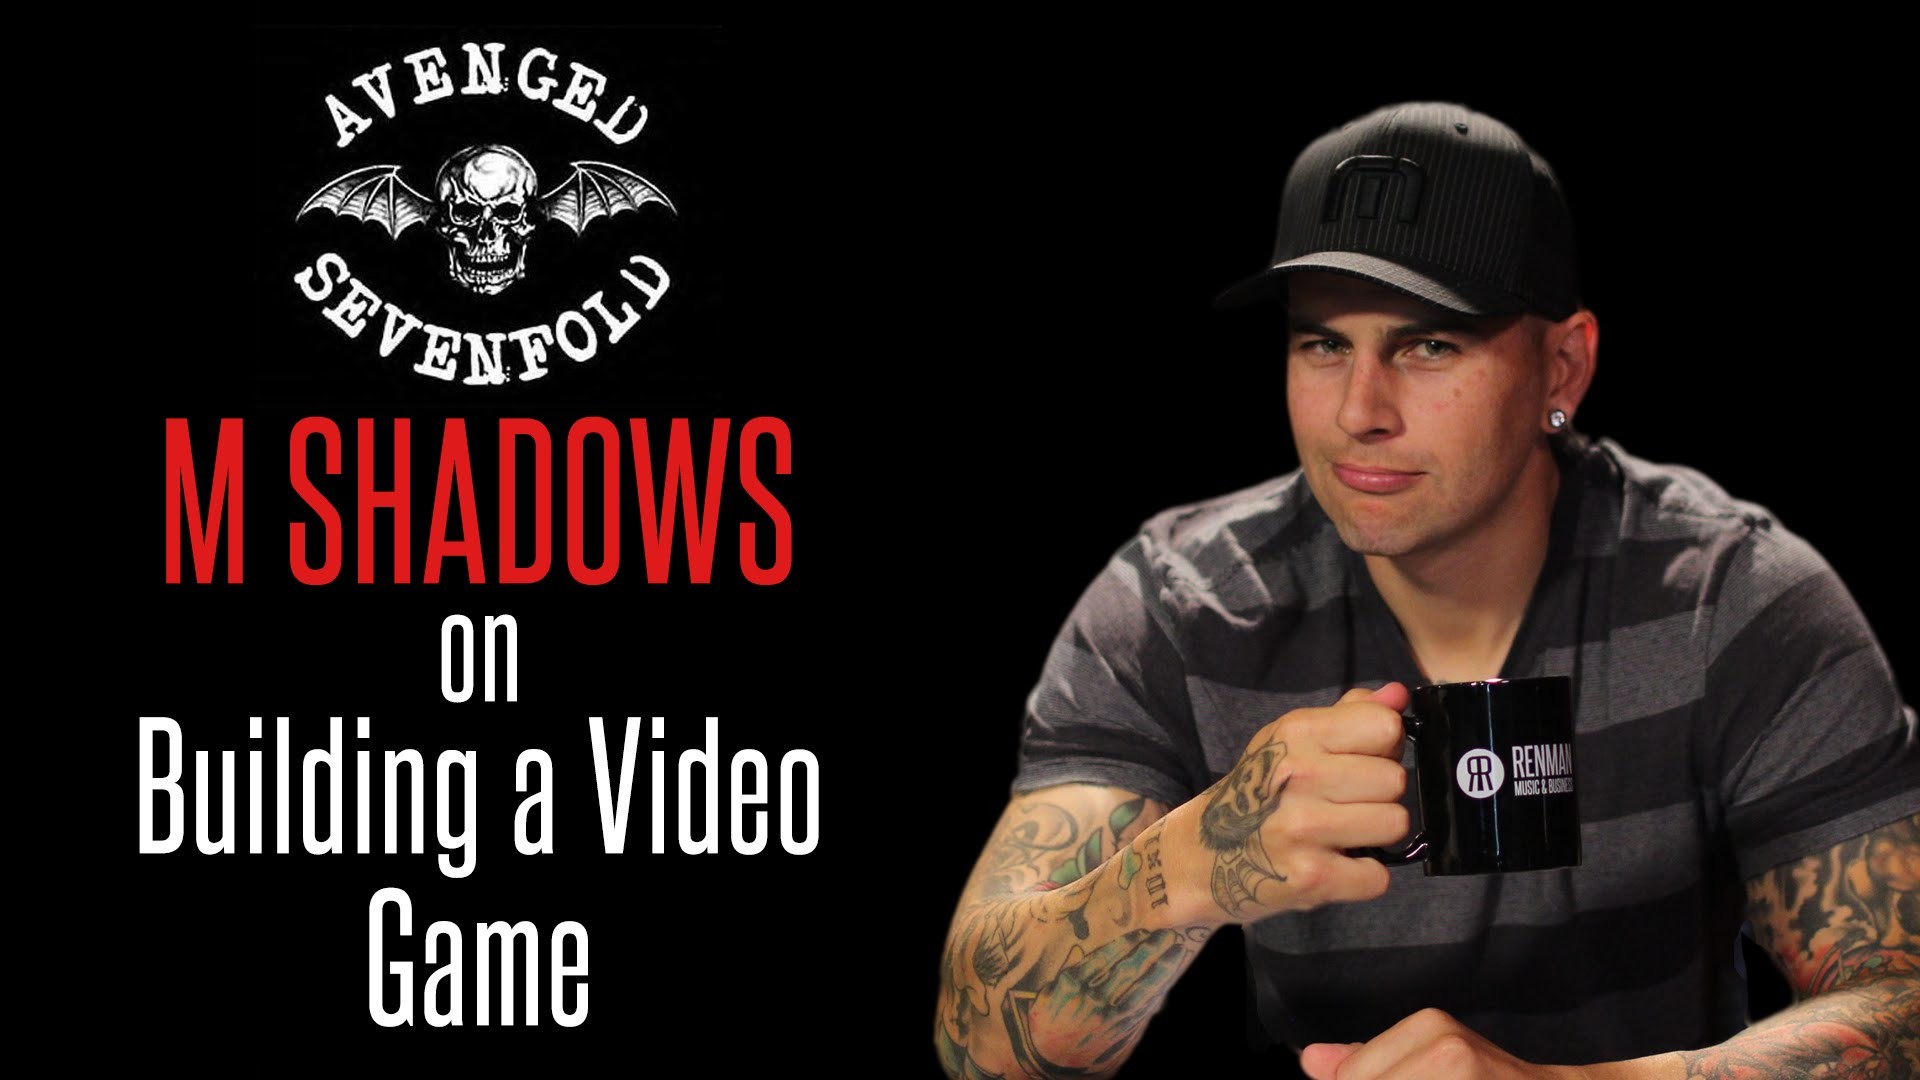 1920x1080 M Shadows of Avenged Sevenfold on Building the Video Game "Death Bat" -  YouTube